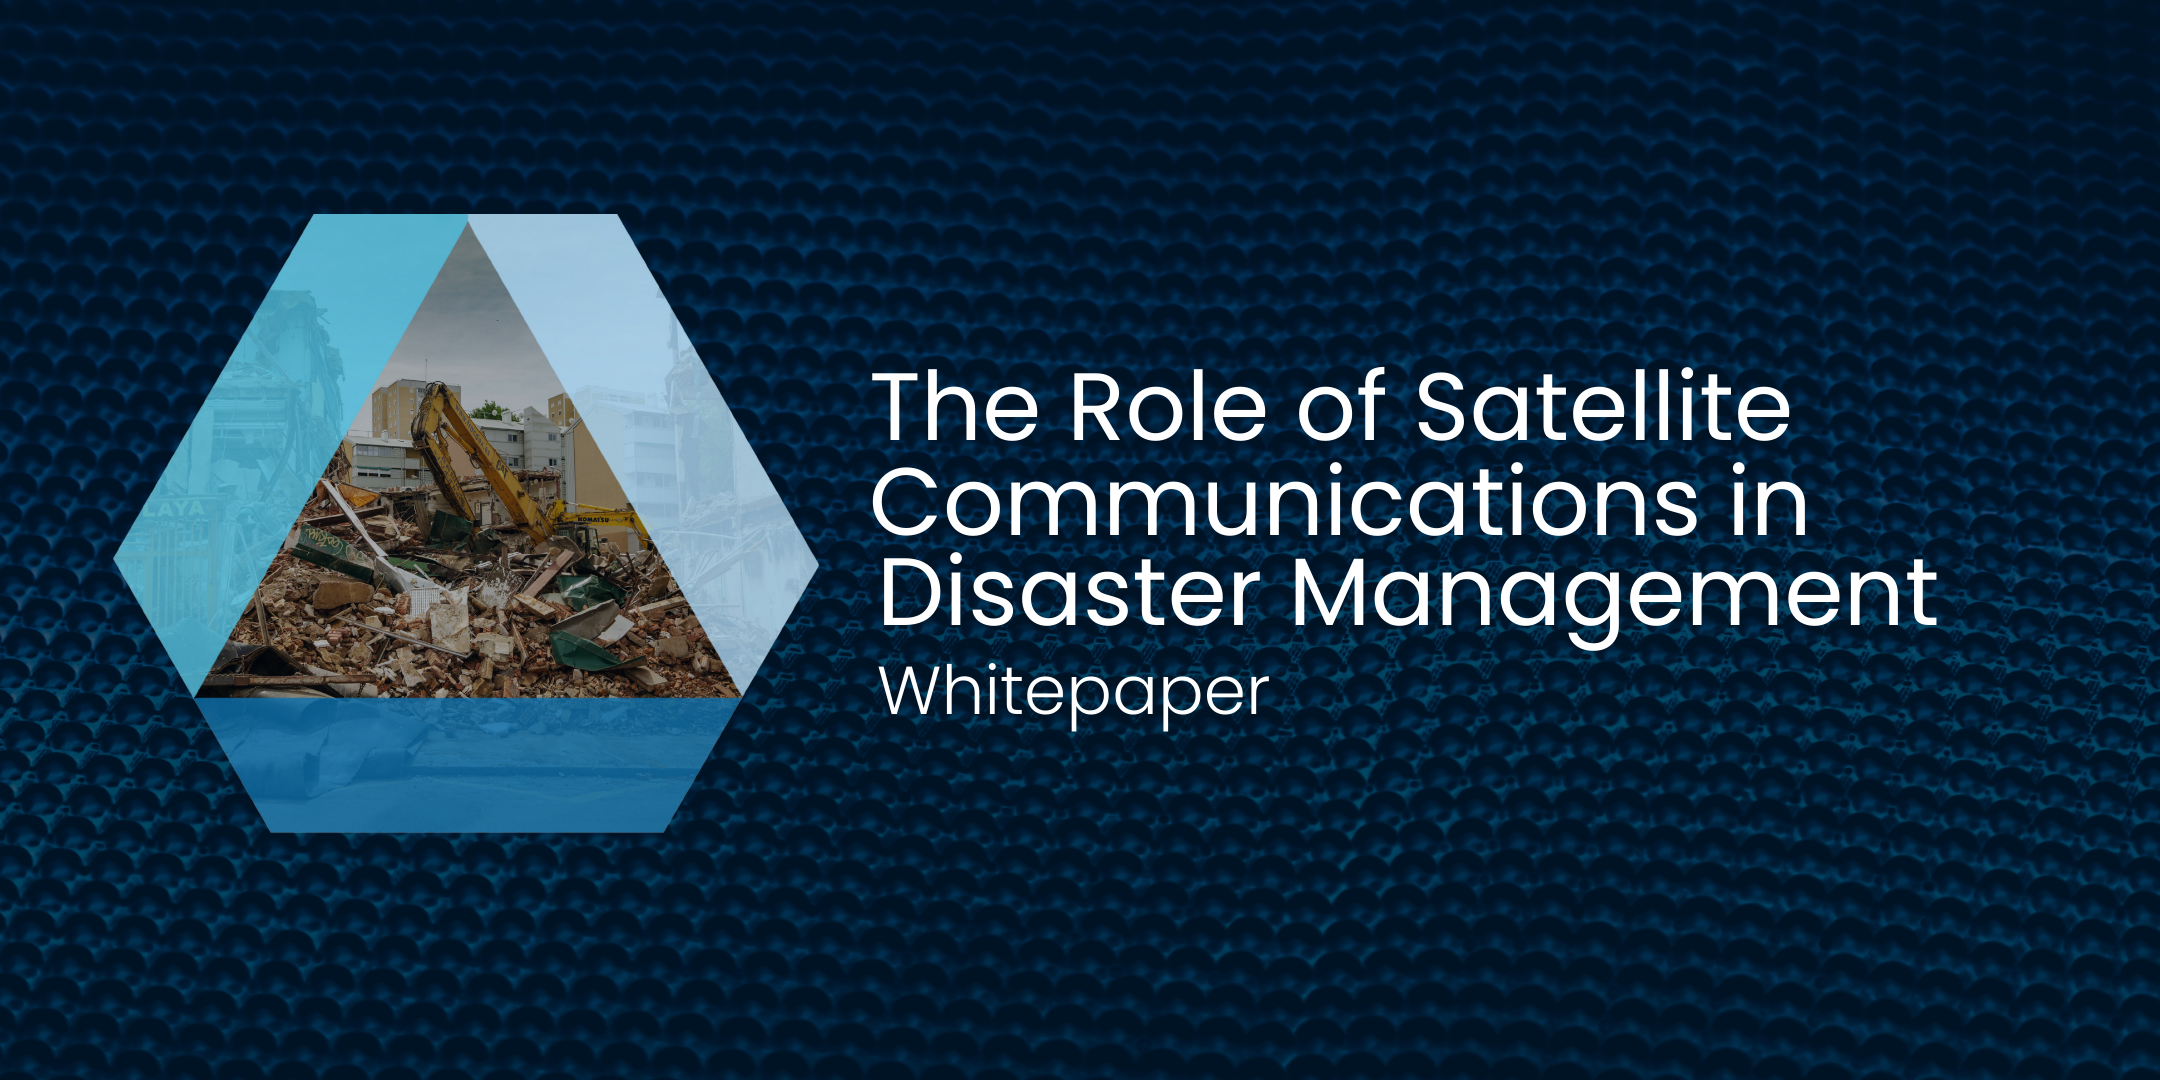 The Role of Satellite Communications in Disaster Management Whitepaper